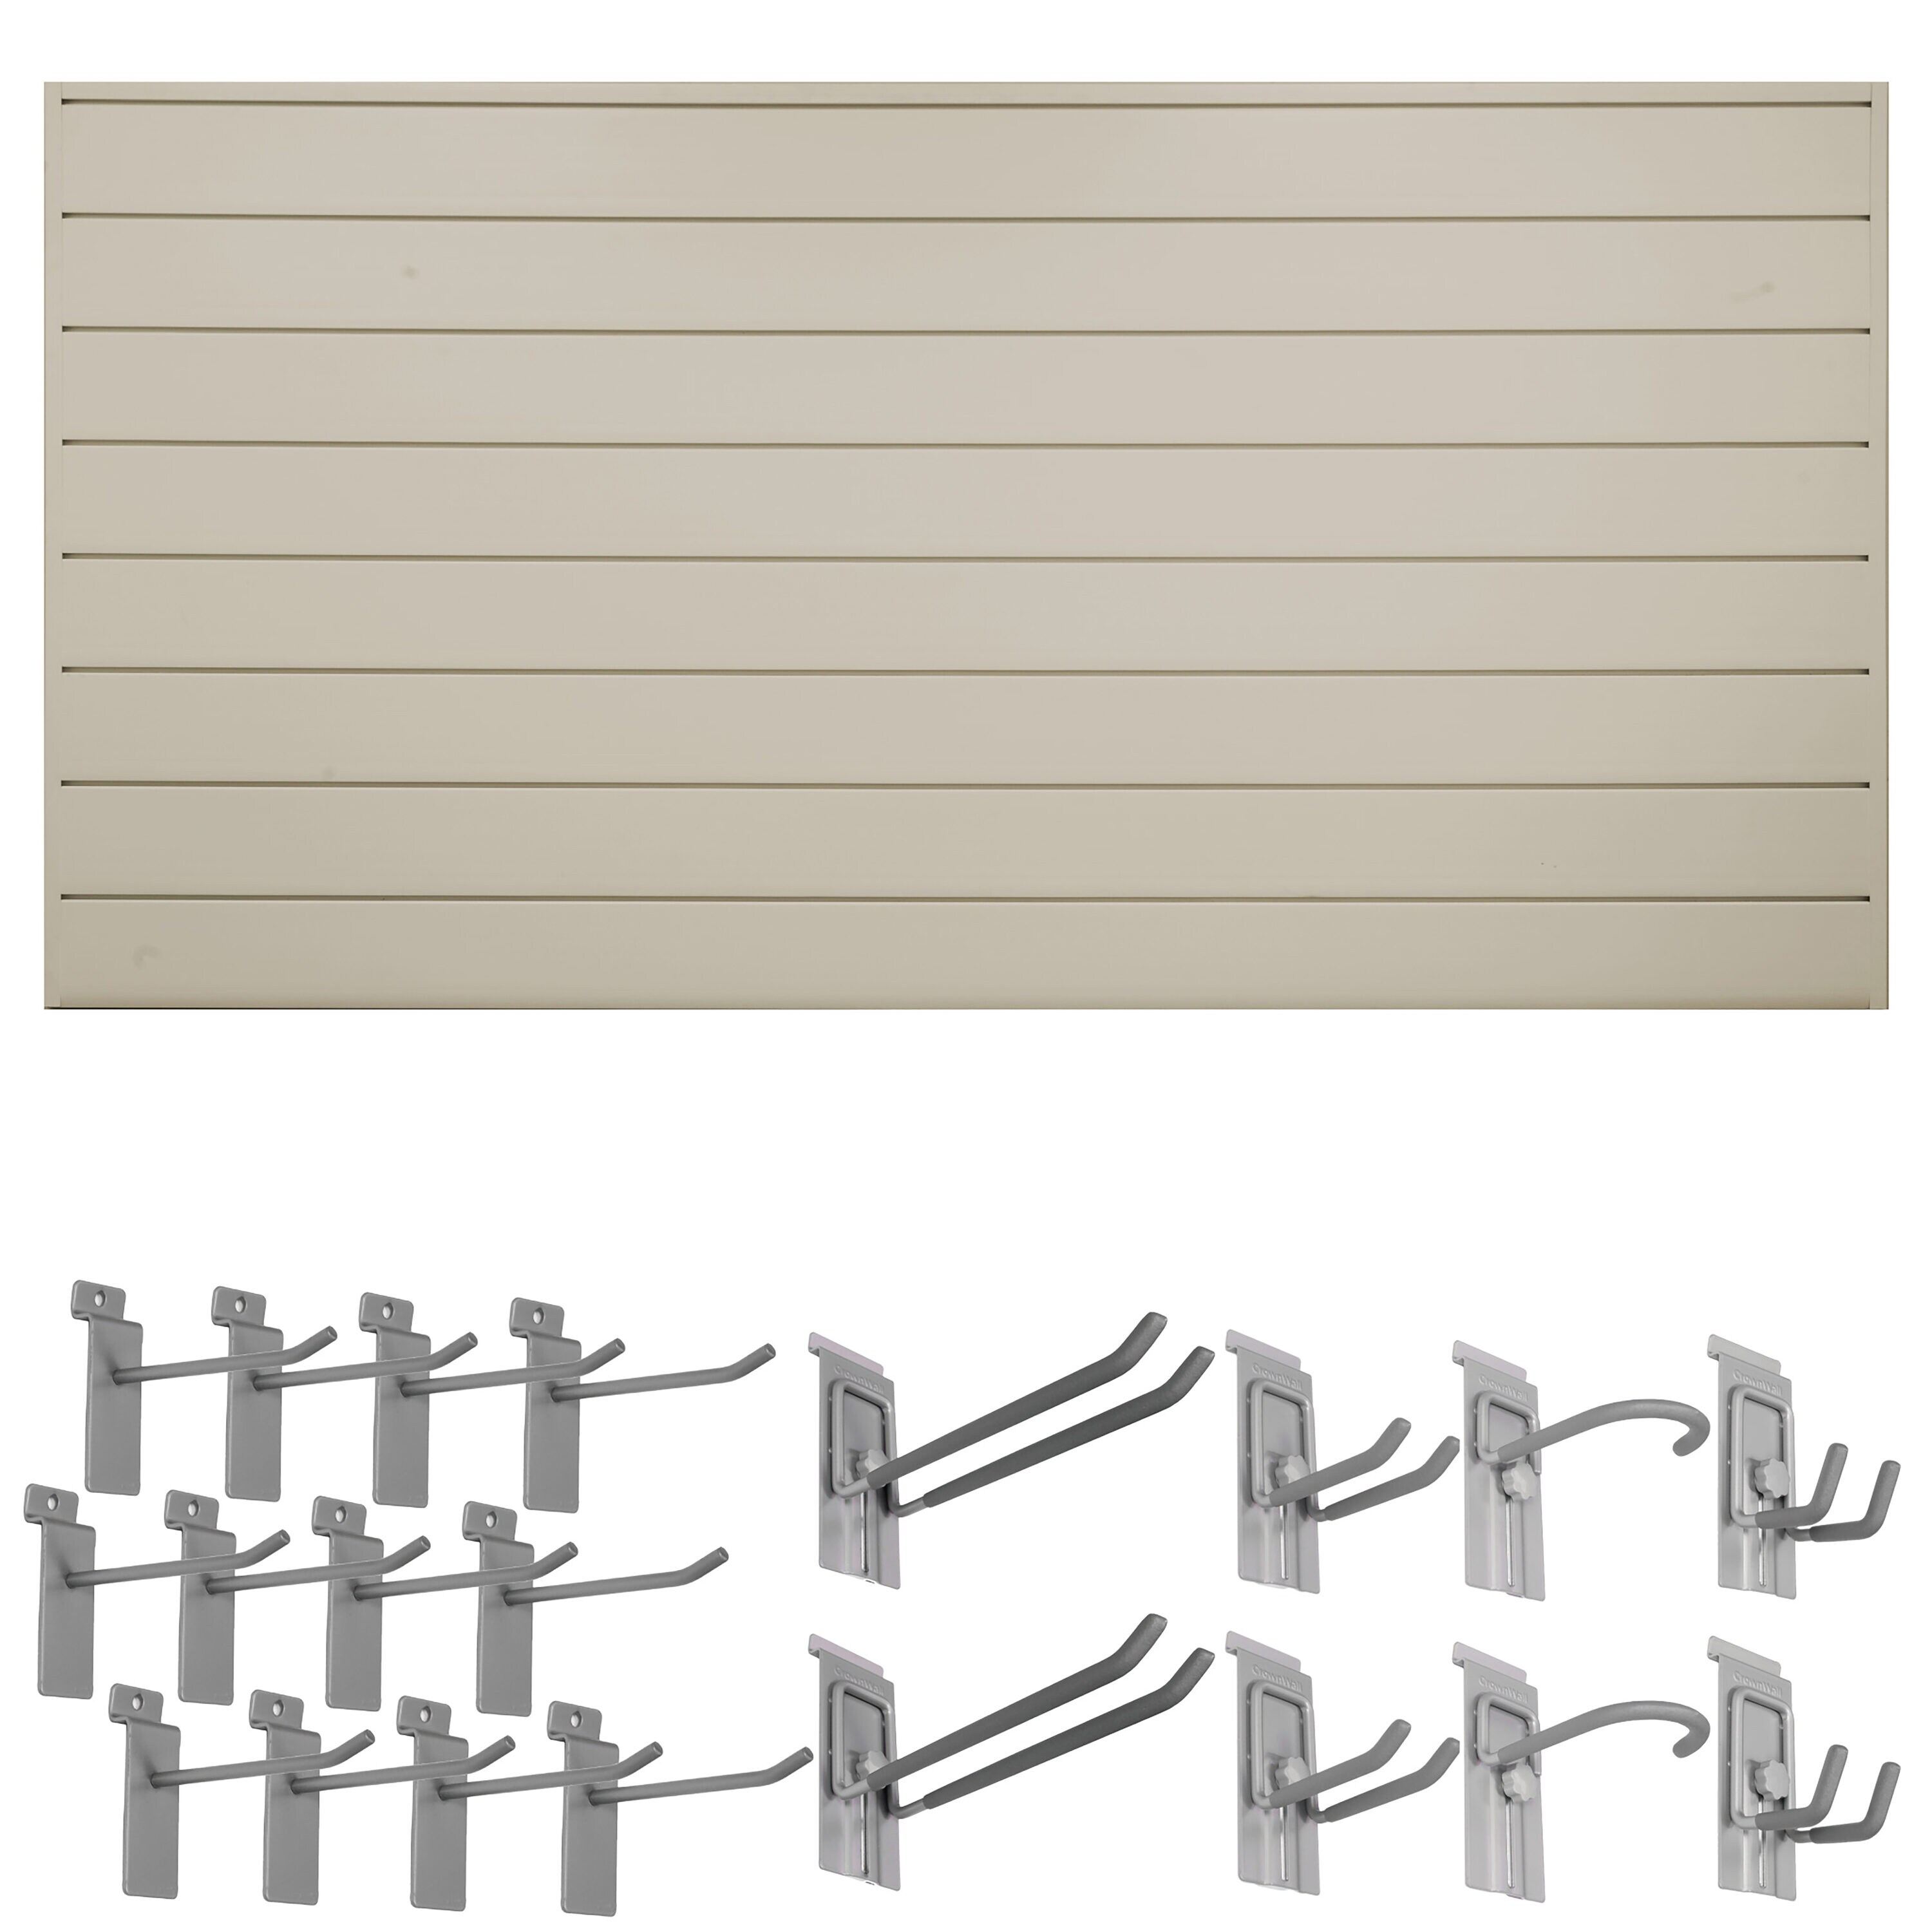 CrownWall 48 in. H x 96 in. W Basic Bundle PVC Slatwall Panel Set with  Locking Hook Kit in Sandstone (20-Piece) in the Slatwall  Rail Storage  Systems department at